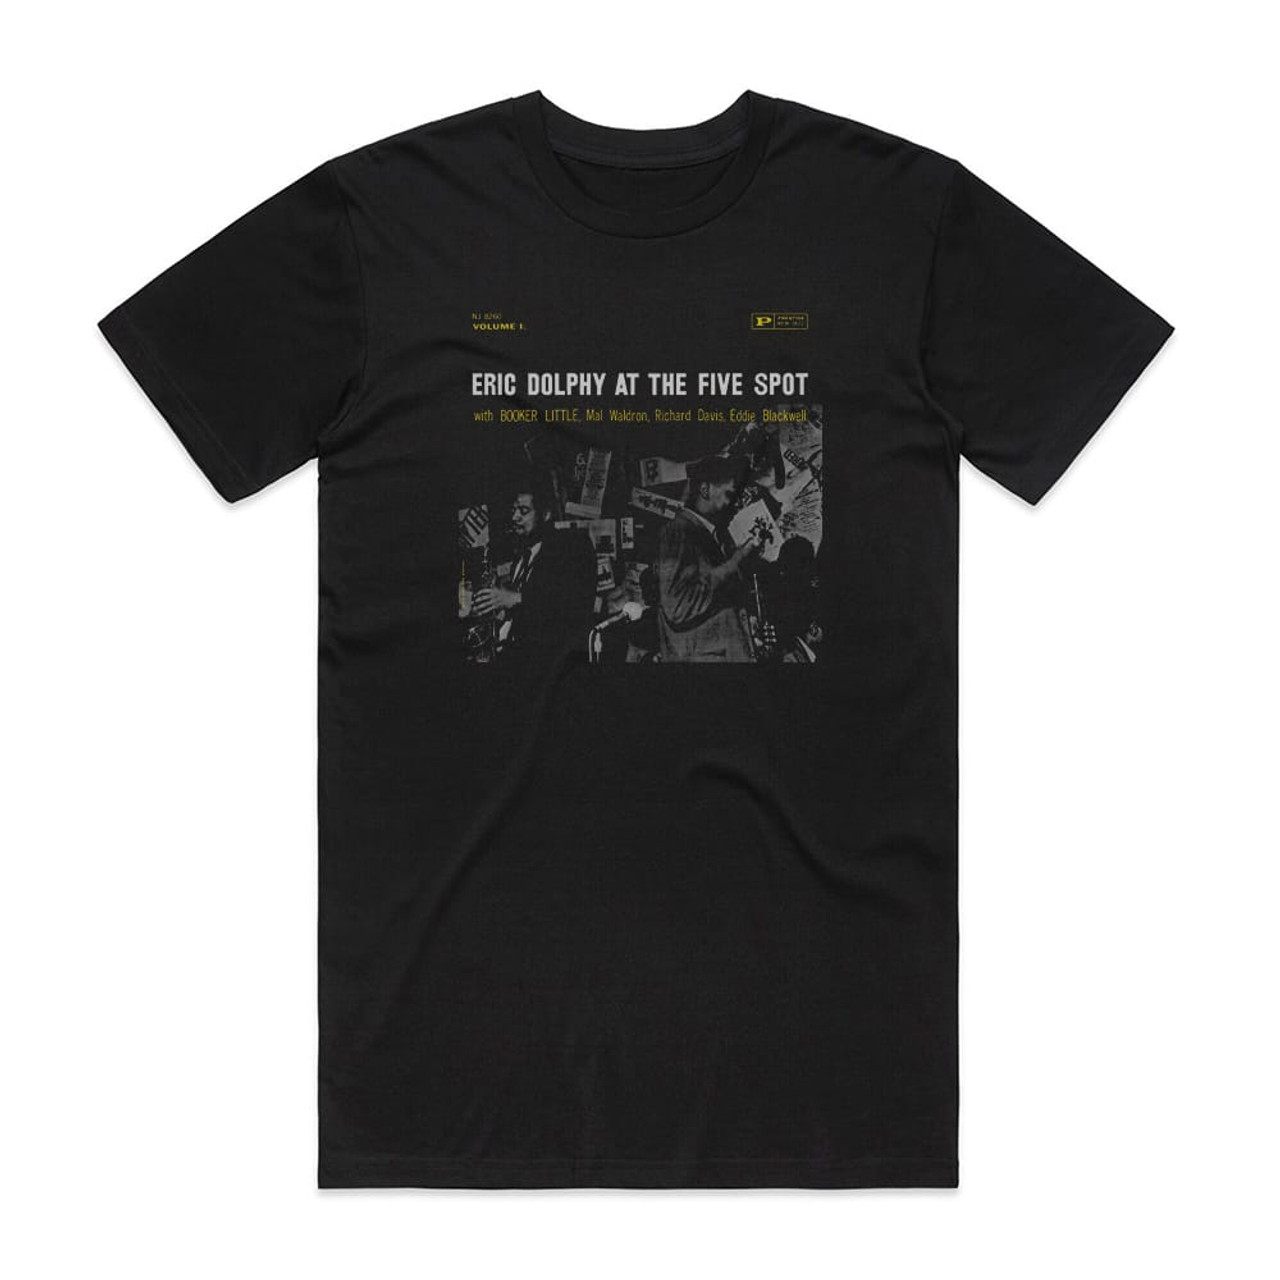 Eric Dolphy At The Five Spot Vol 1 Album Cover T-Shirt Black